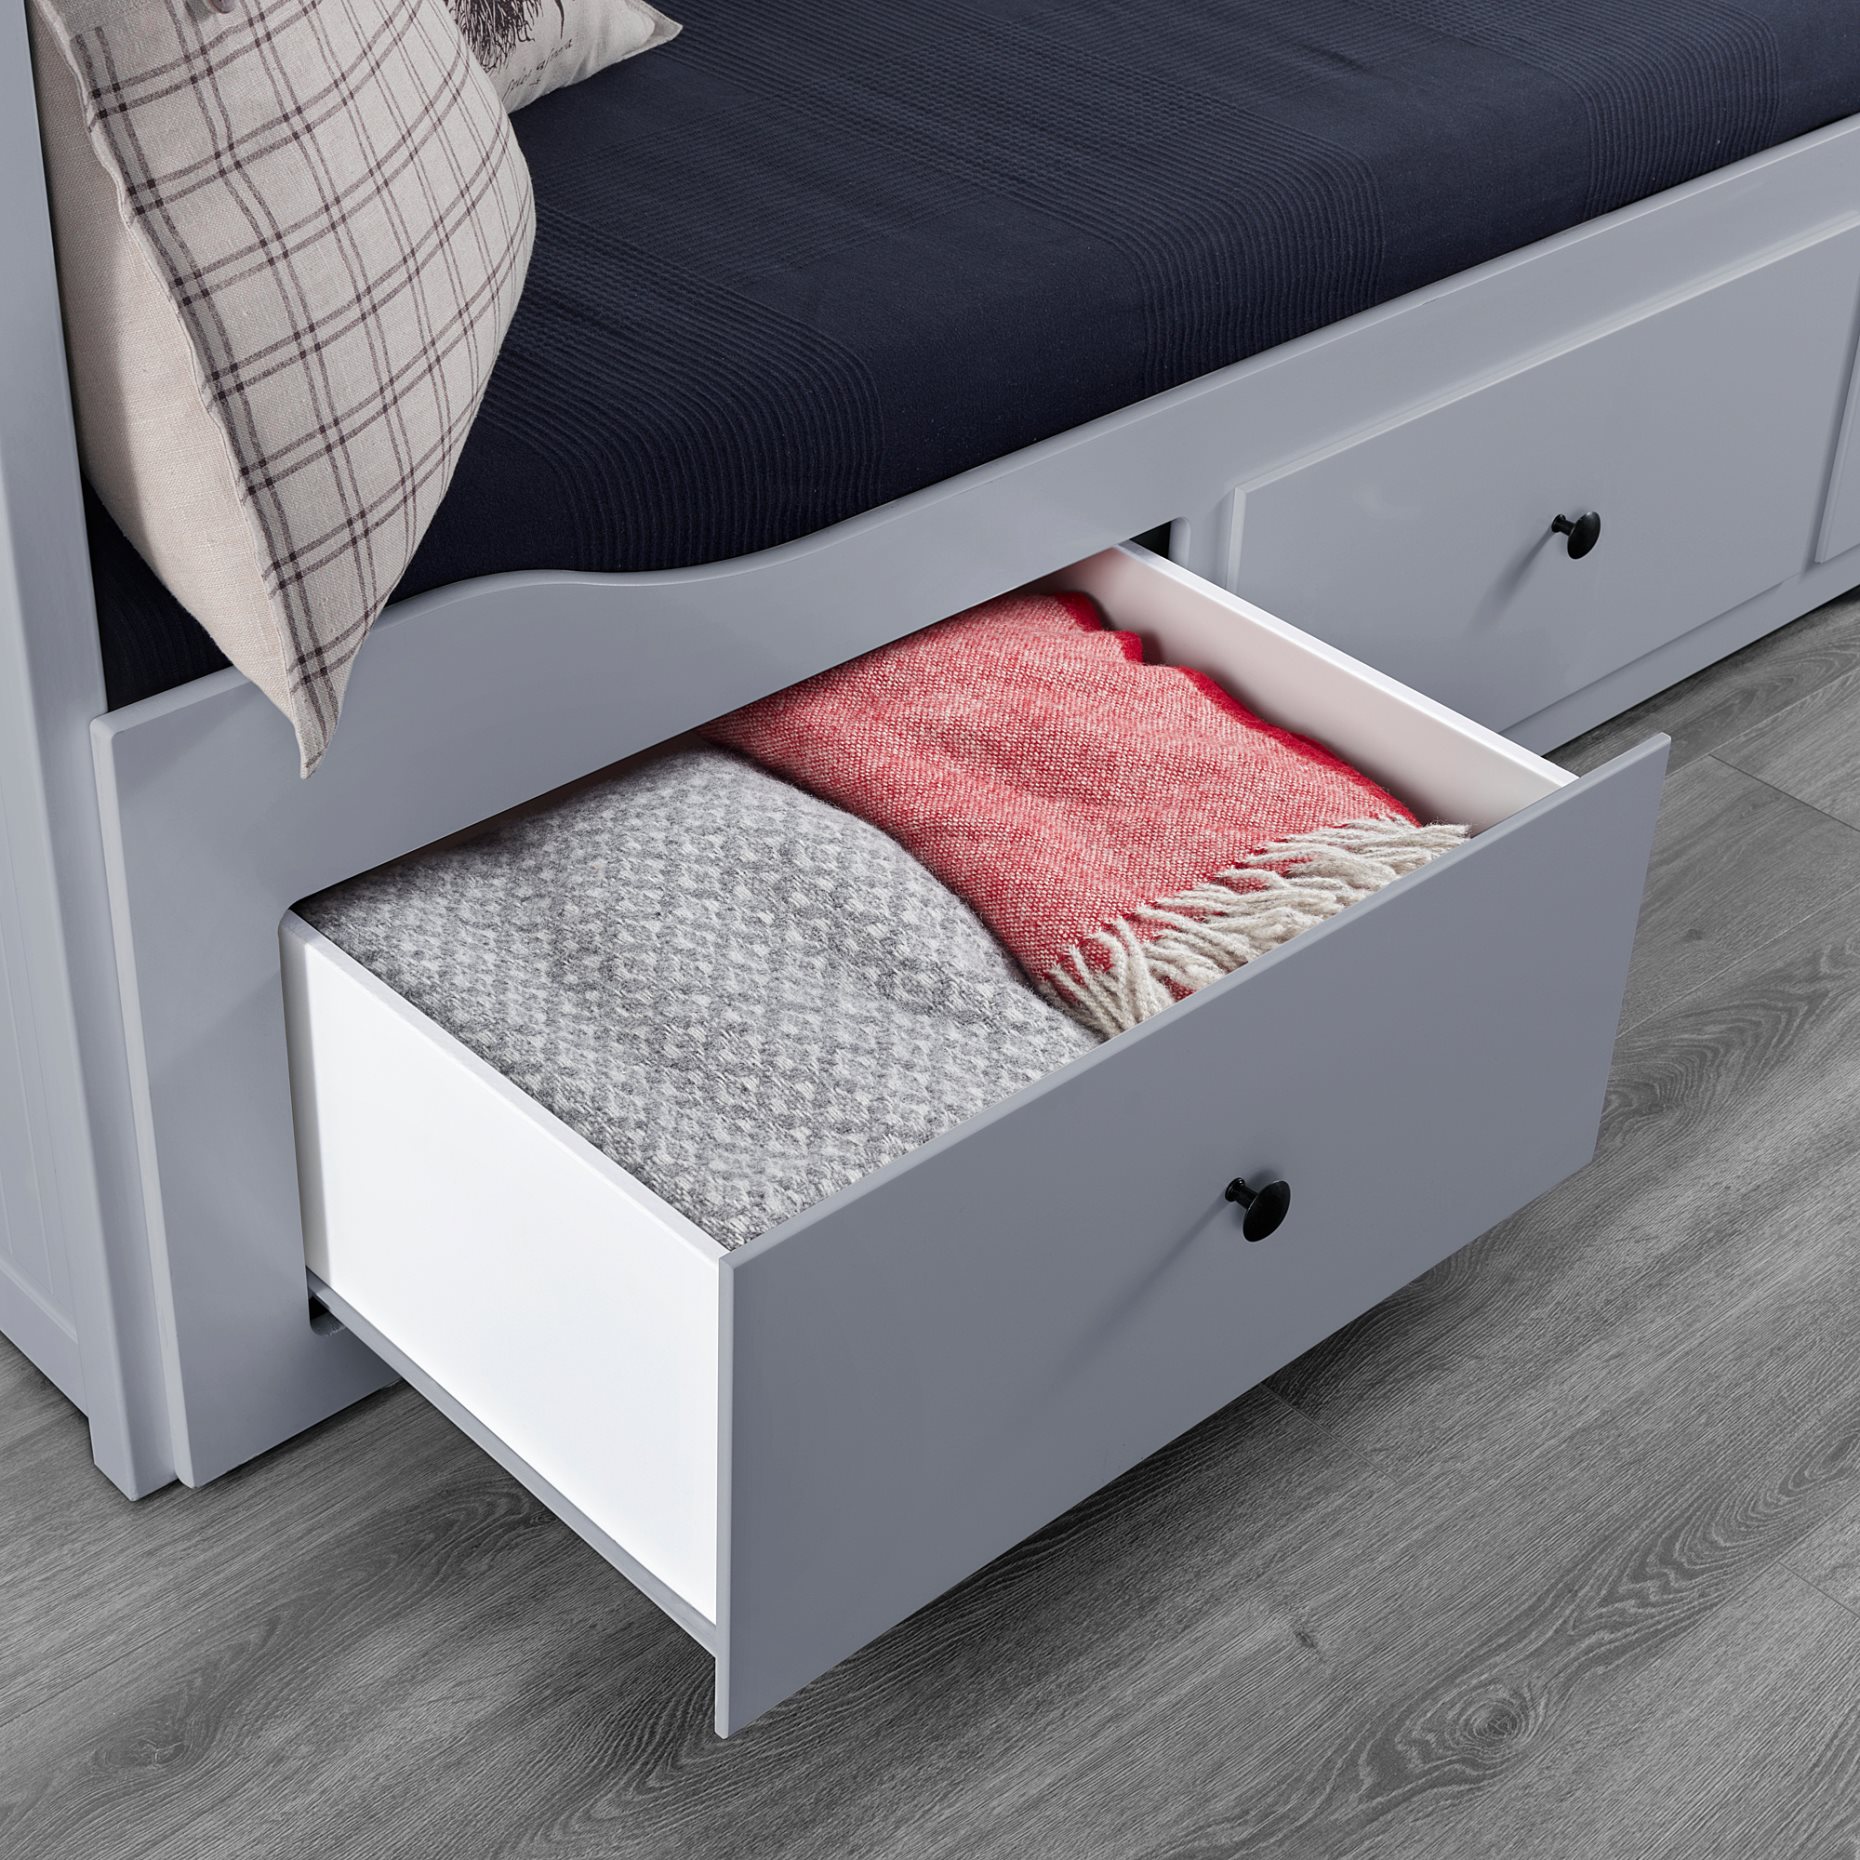 HEMNES, day-bed frame with 3 drawers, 80x200 cm, 603.722.76